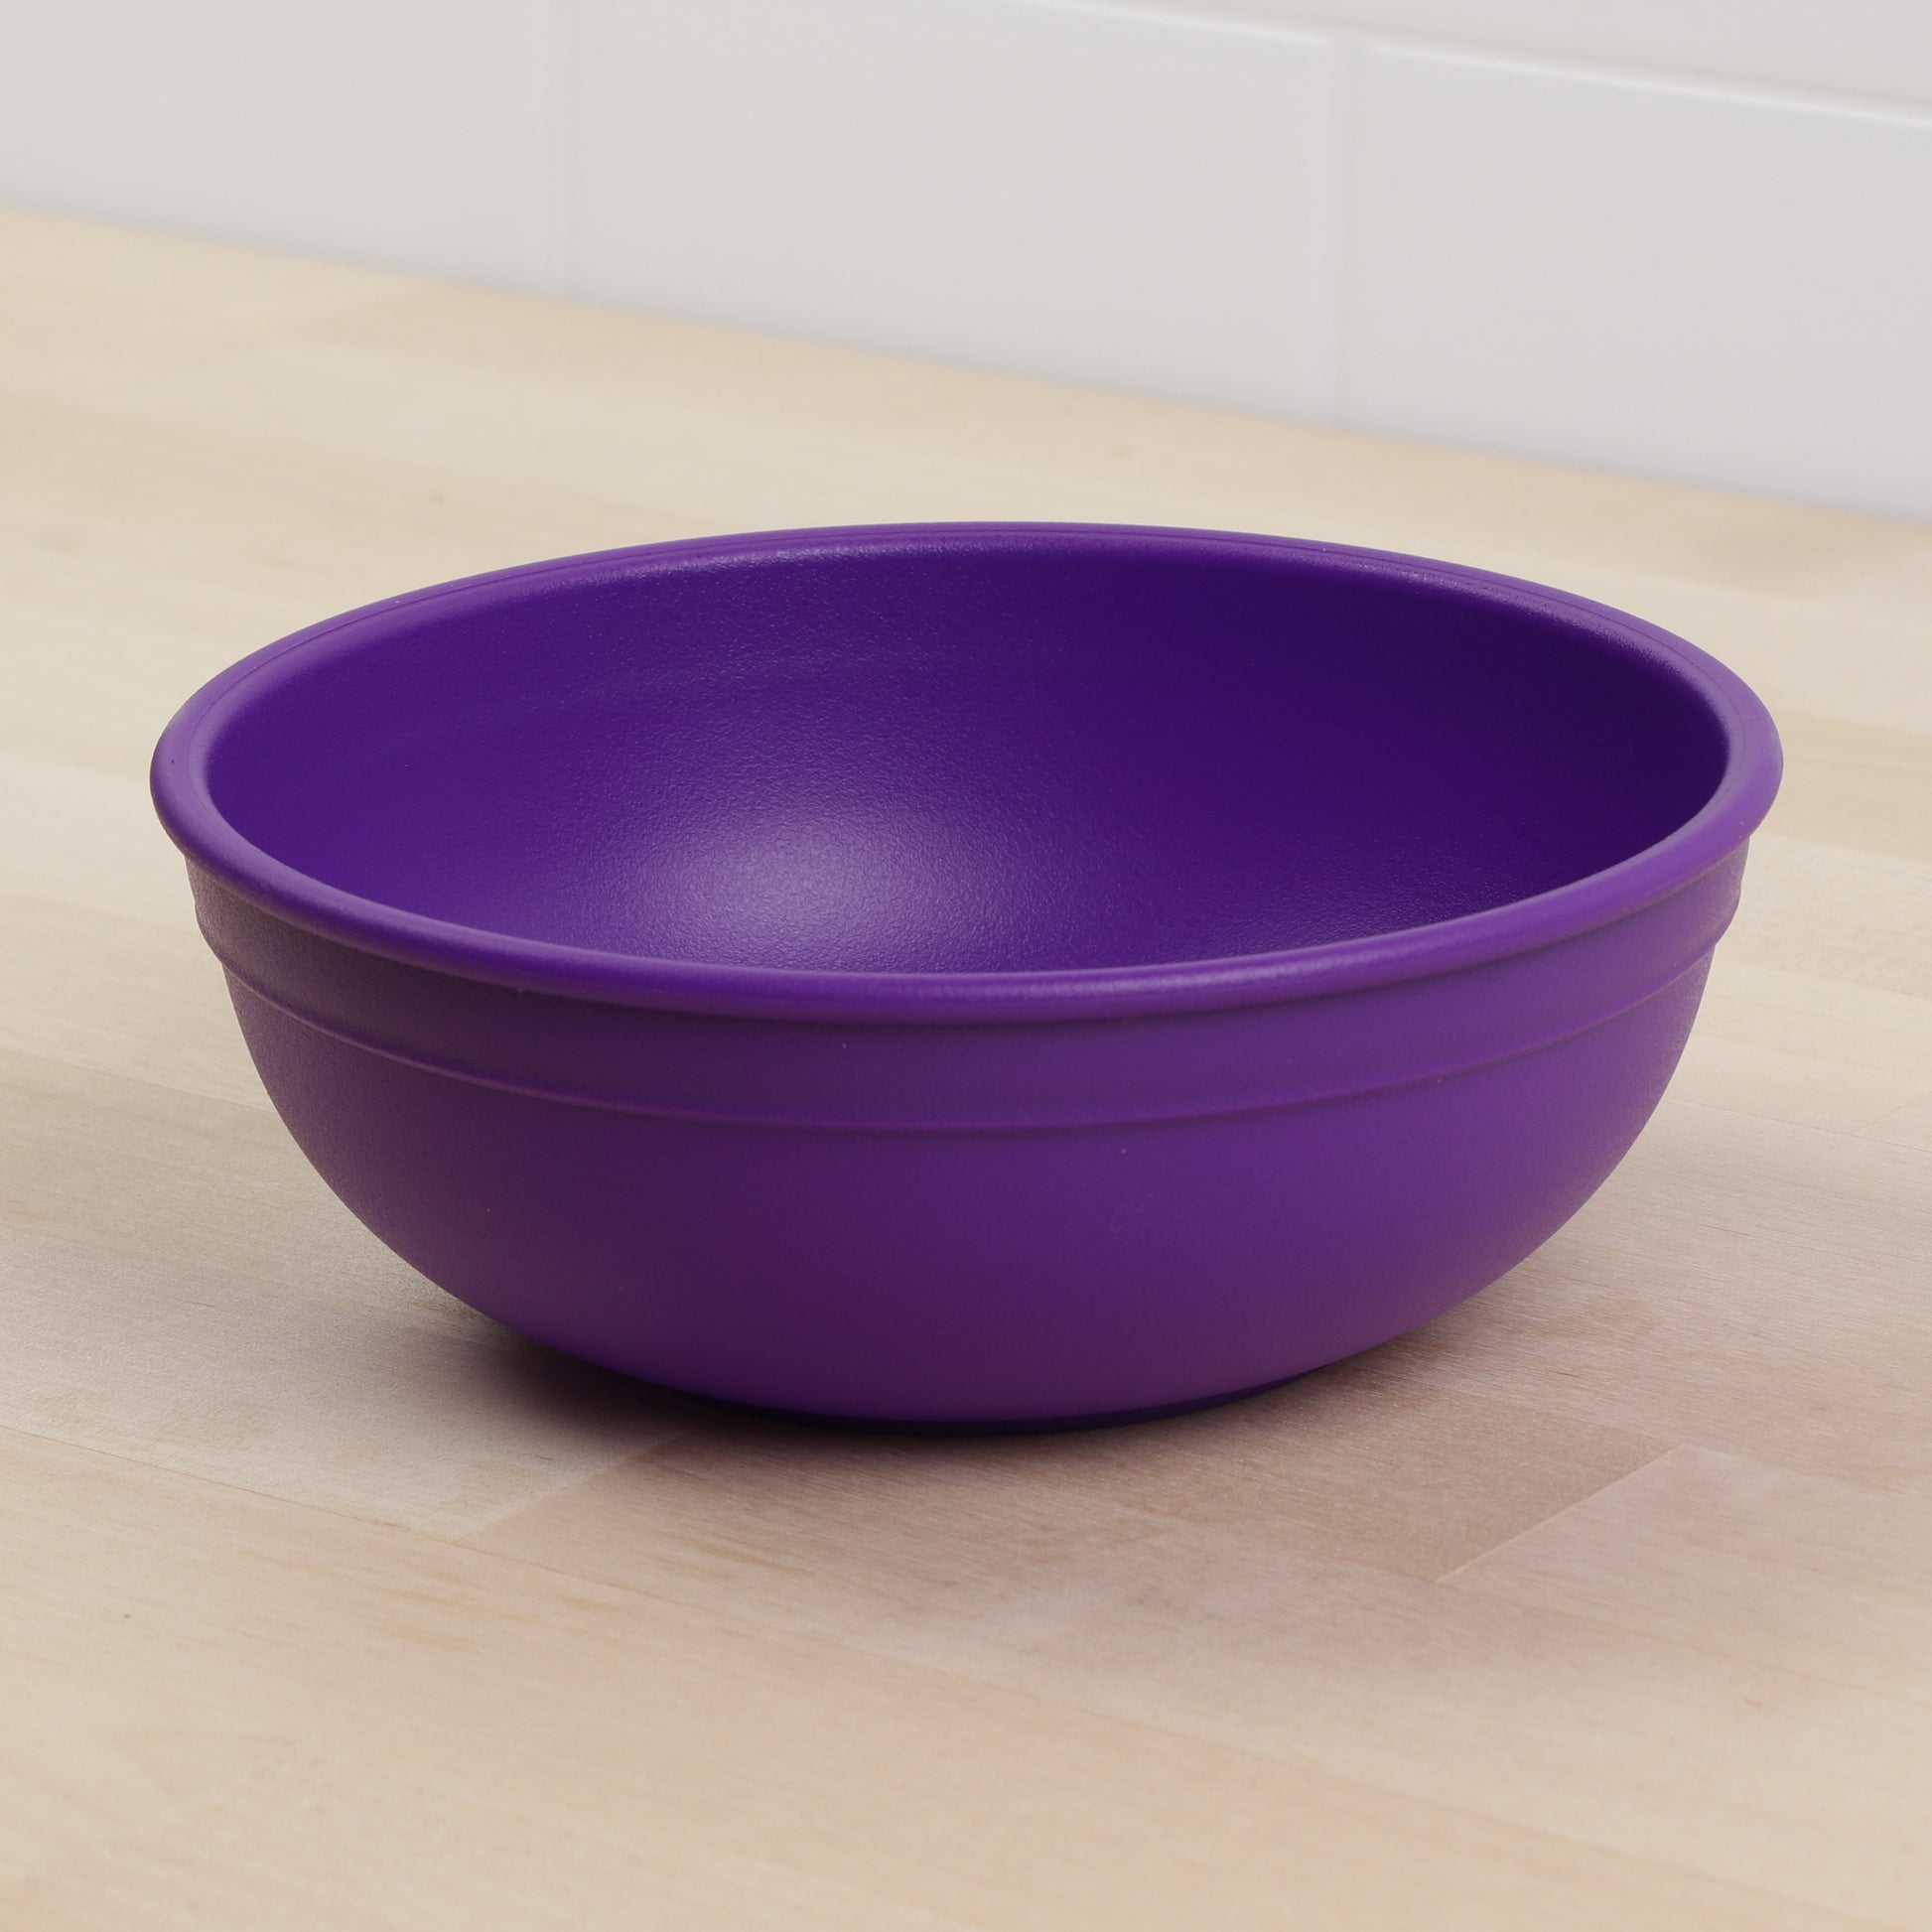 Re-Play Bowl | Amethyst Large Size from Bear & Moo